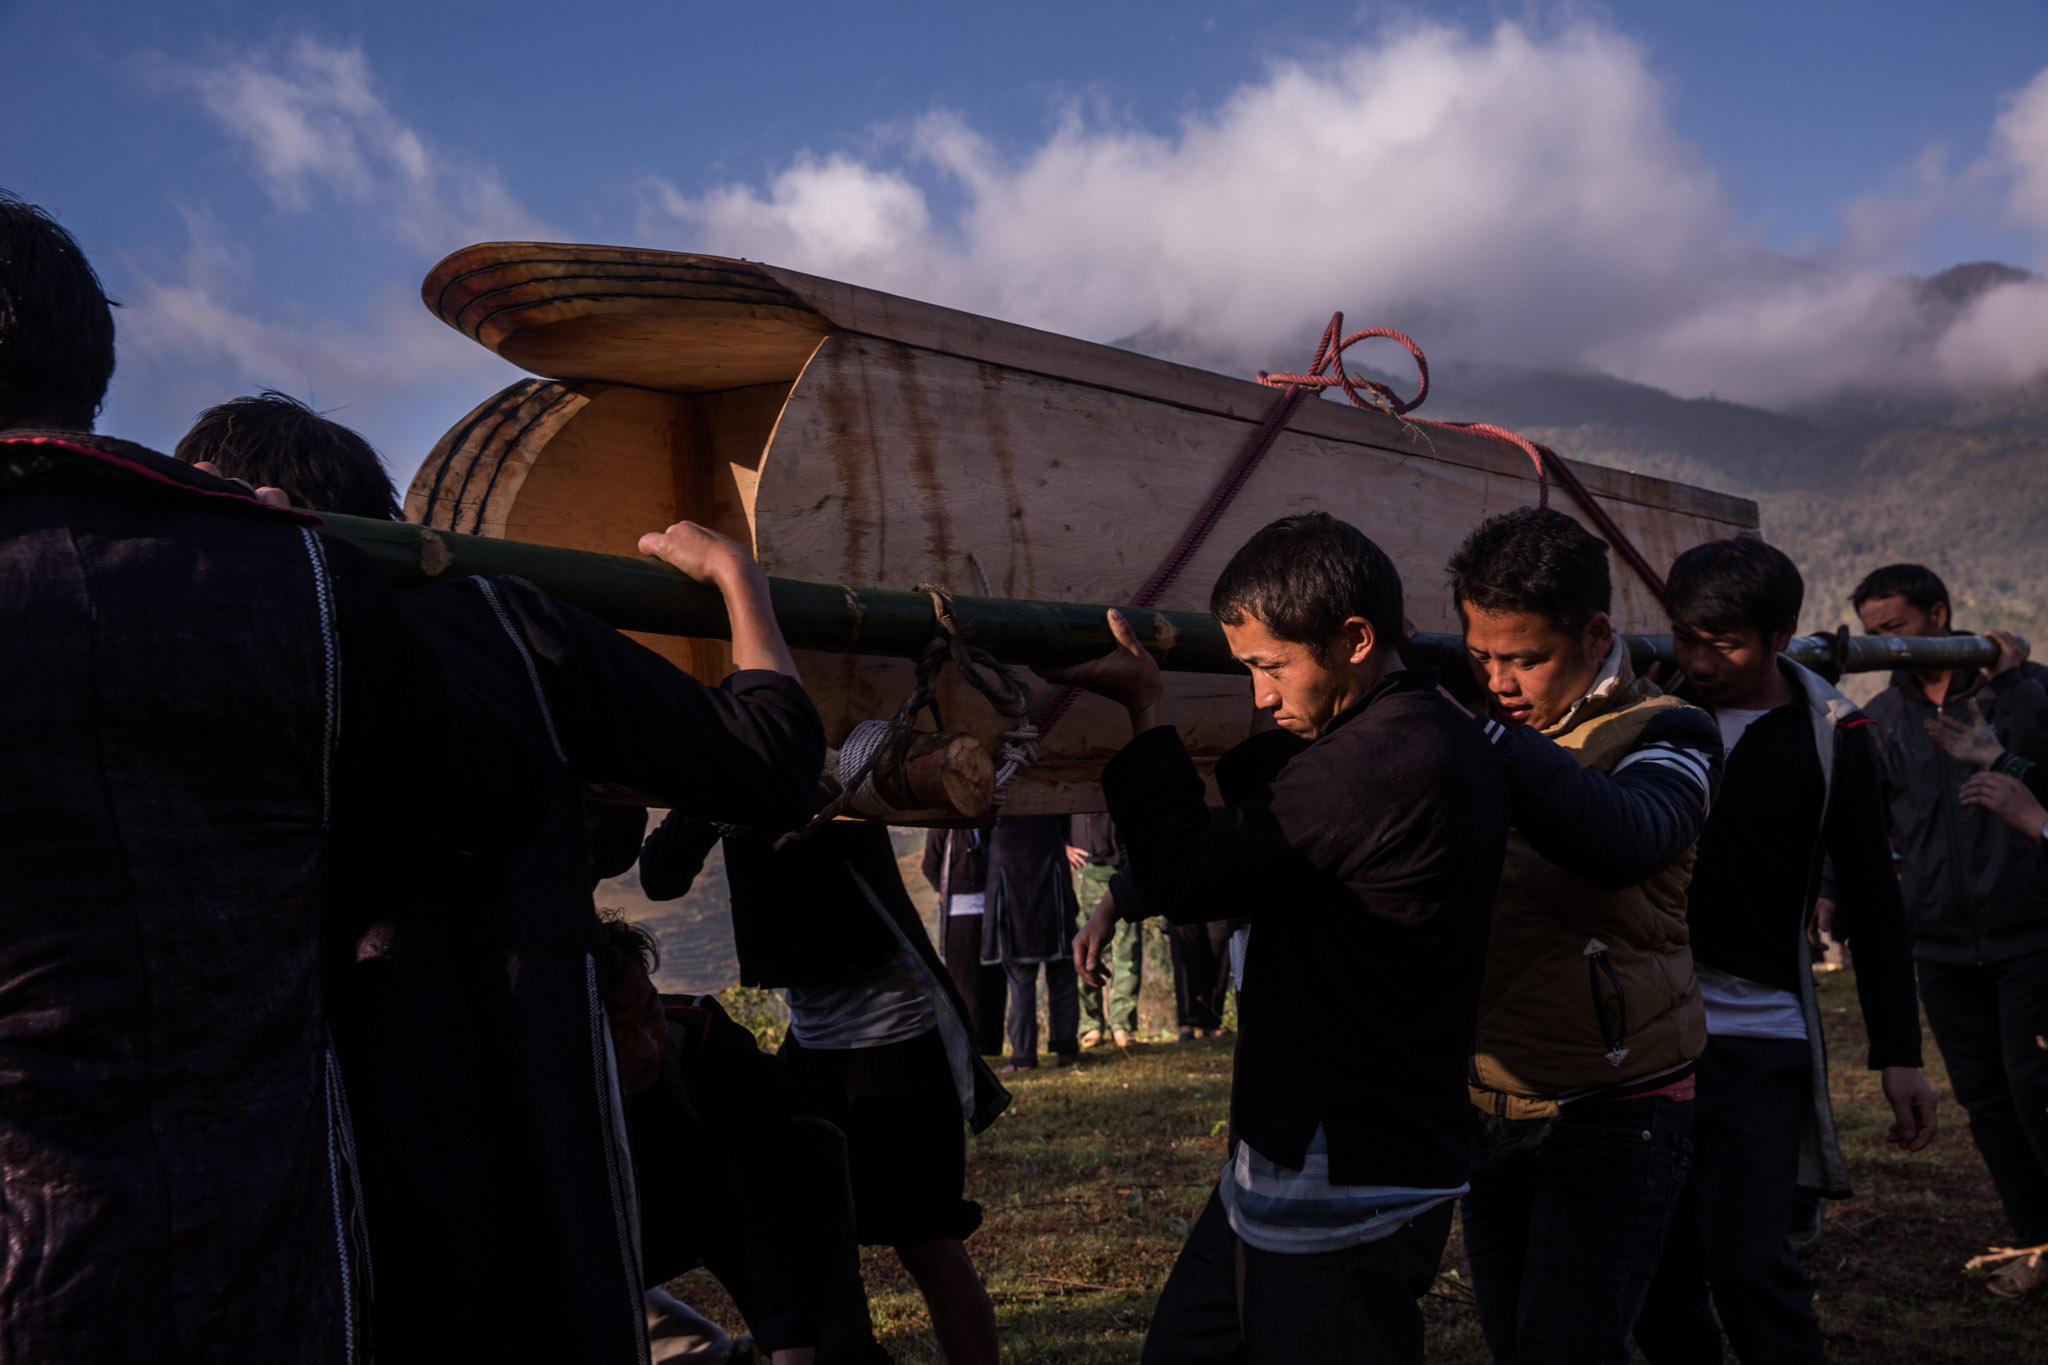 The body of the deceased is carried around the mountain while the sound of a musical instrument sounds during its journey.